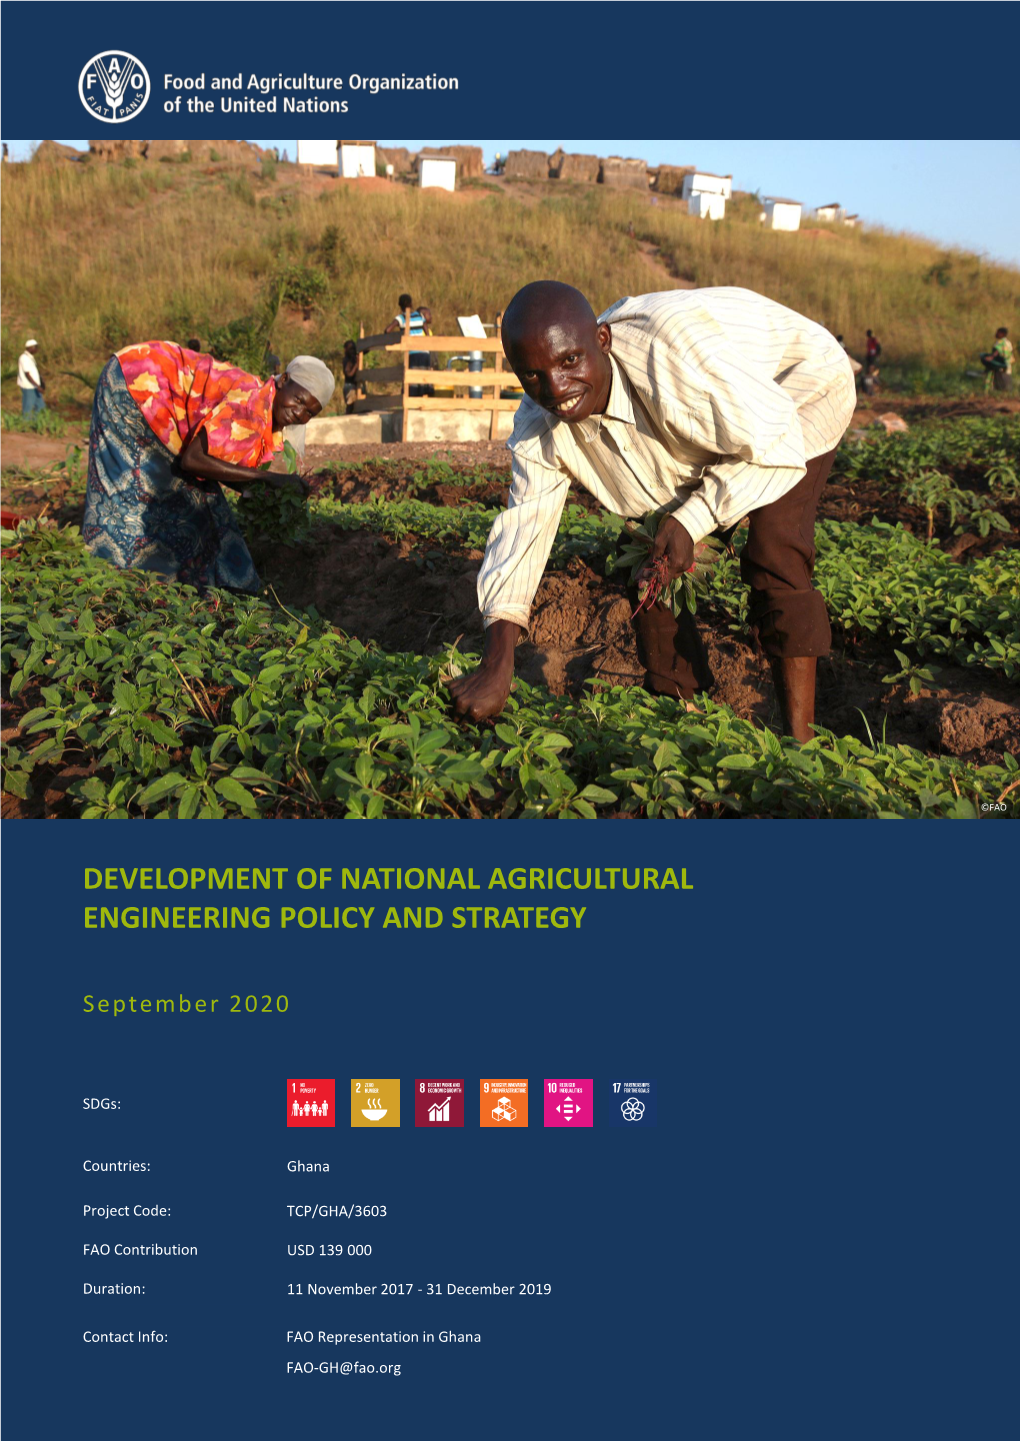 Development of National Agricultural Engineering Policy and Strategy